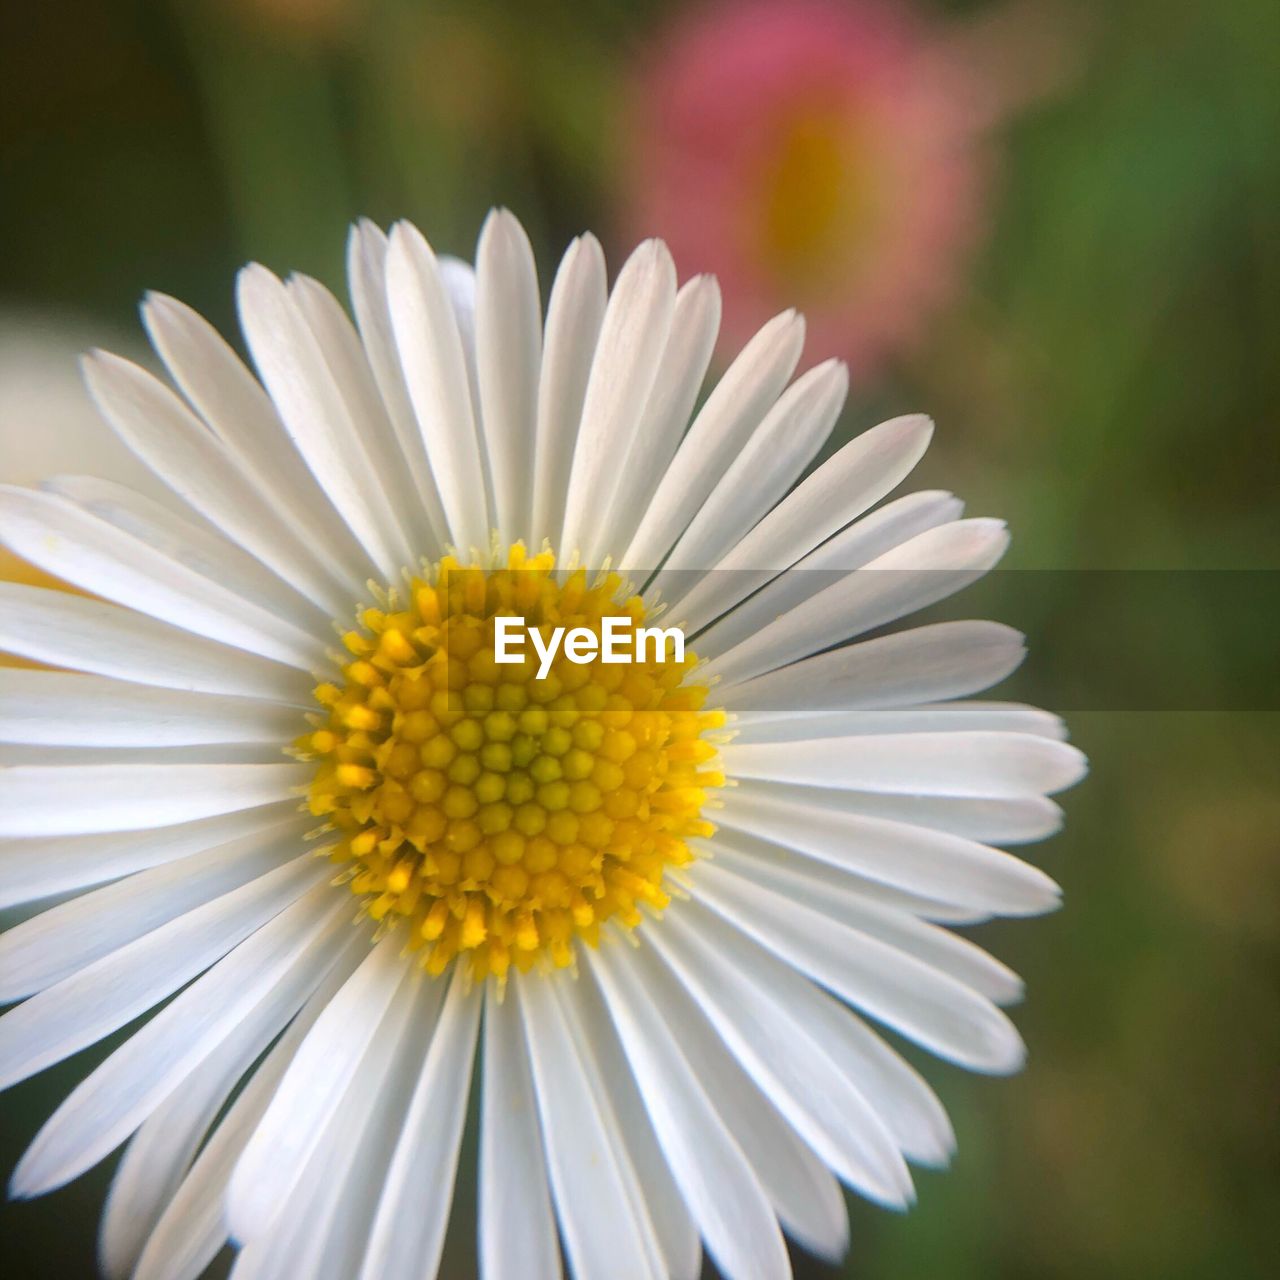 CLOSE-UP OF WHITE DAISY FLOWER AGAINST BLURRED BACKGROUND